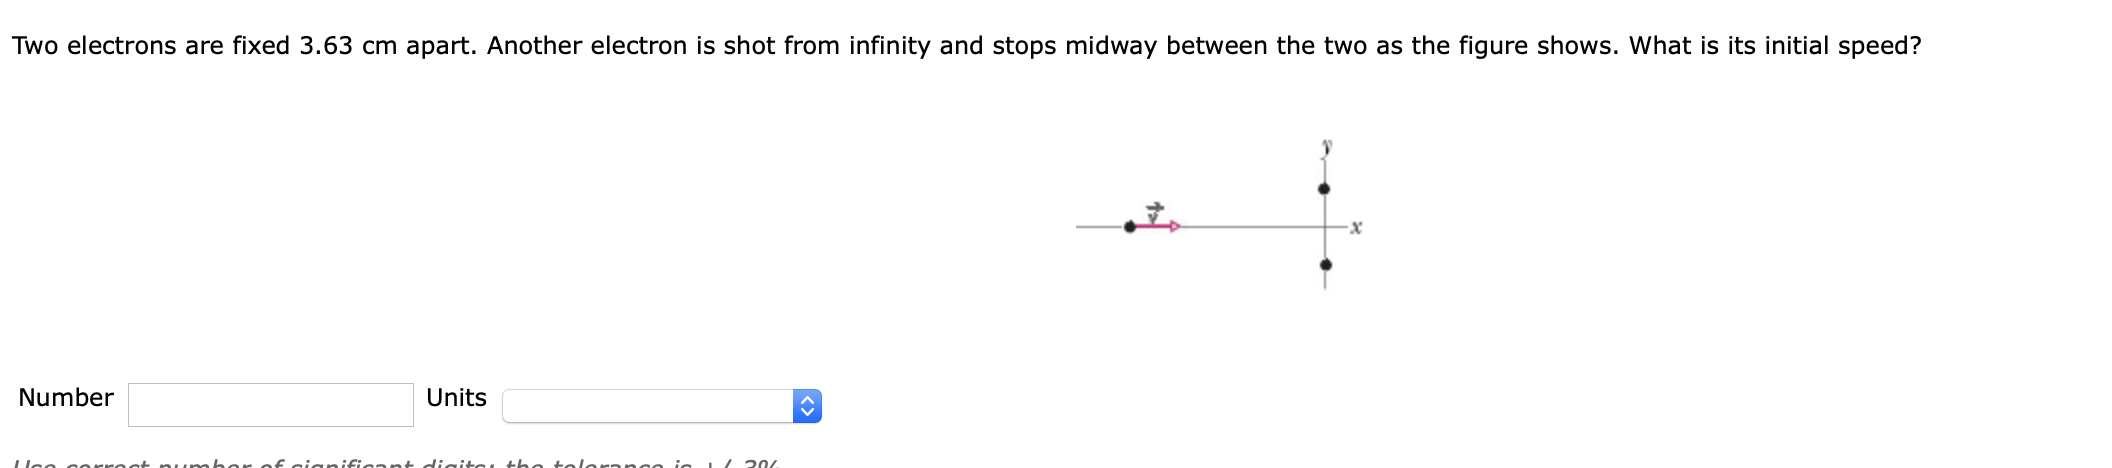 Two electrons are fixed 3.63 cm apart. Another electron is shot from infinity and stops midway between the two as the figure shows. What is its initial speed?
Number
Units
digil
ifican
